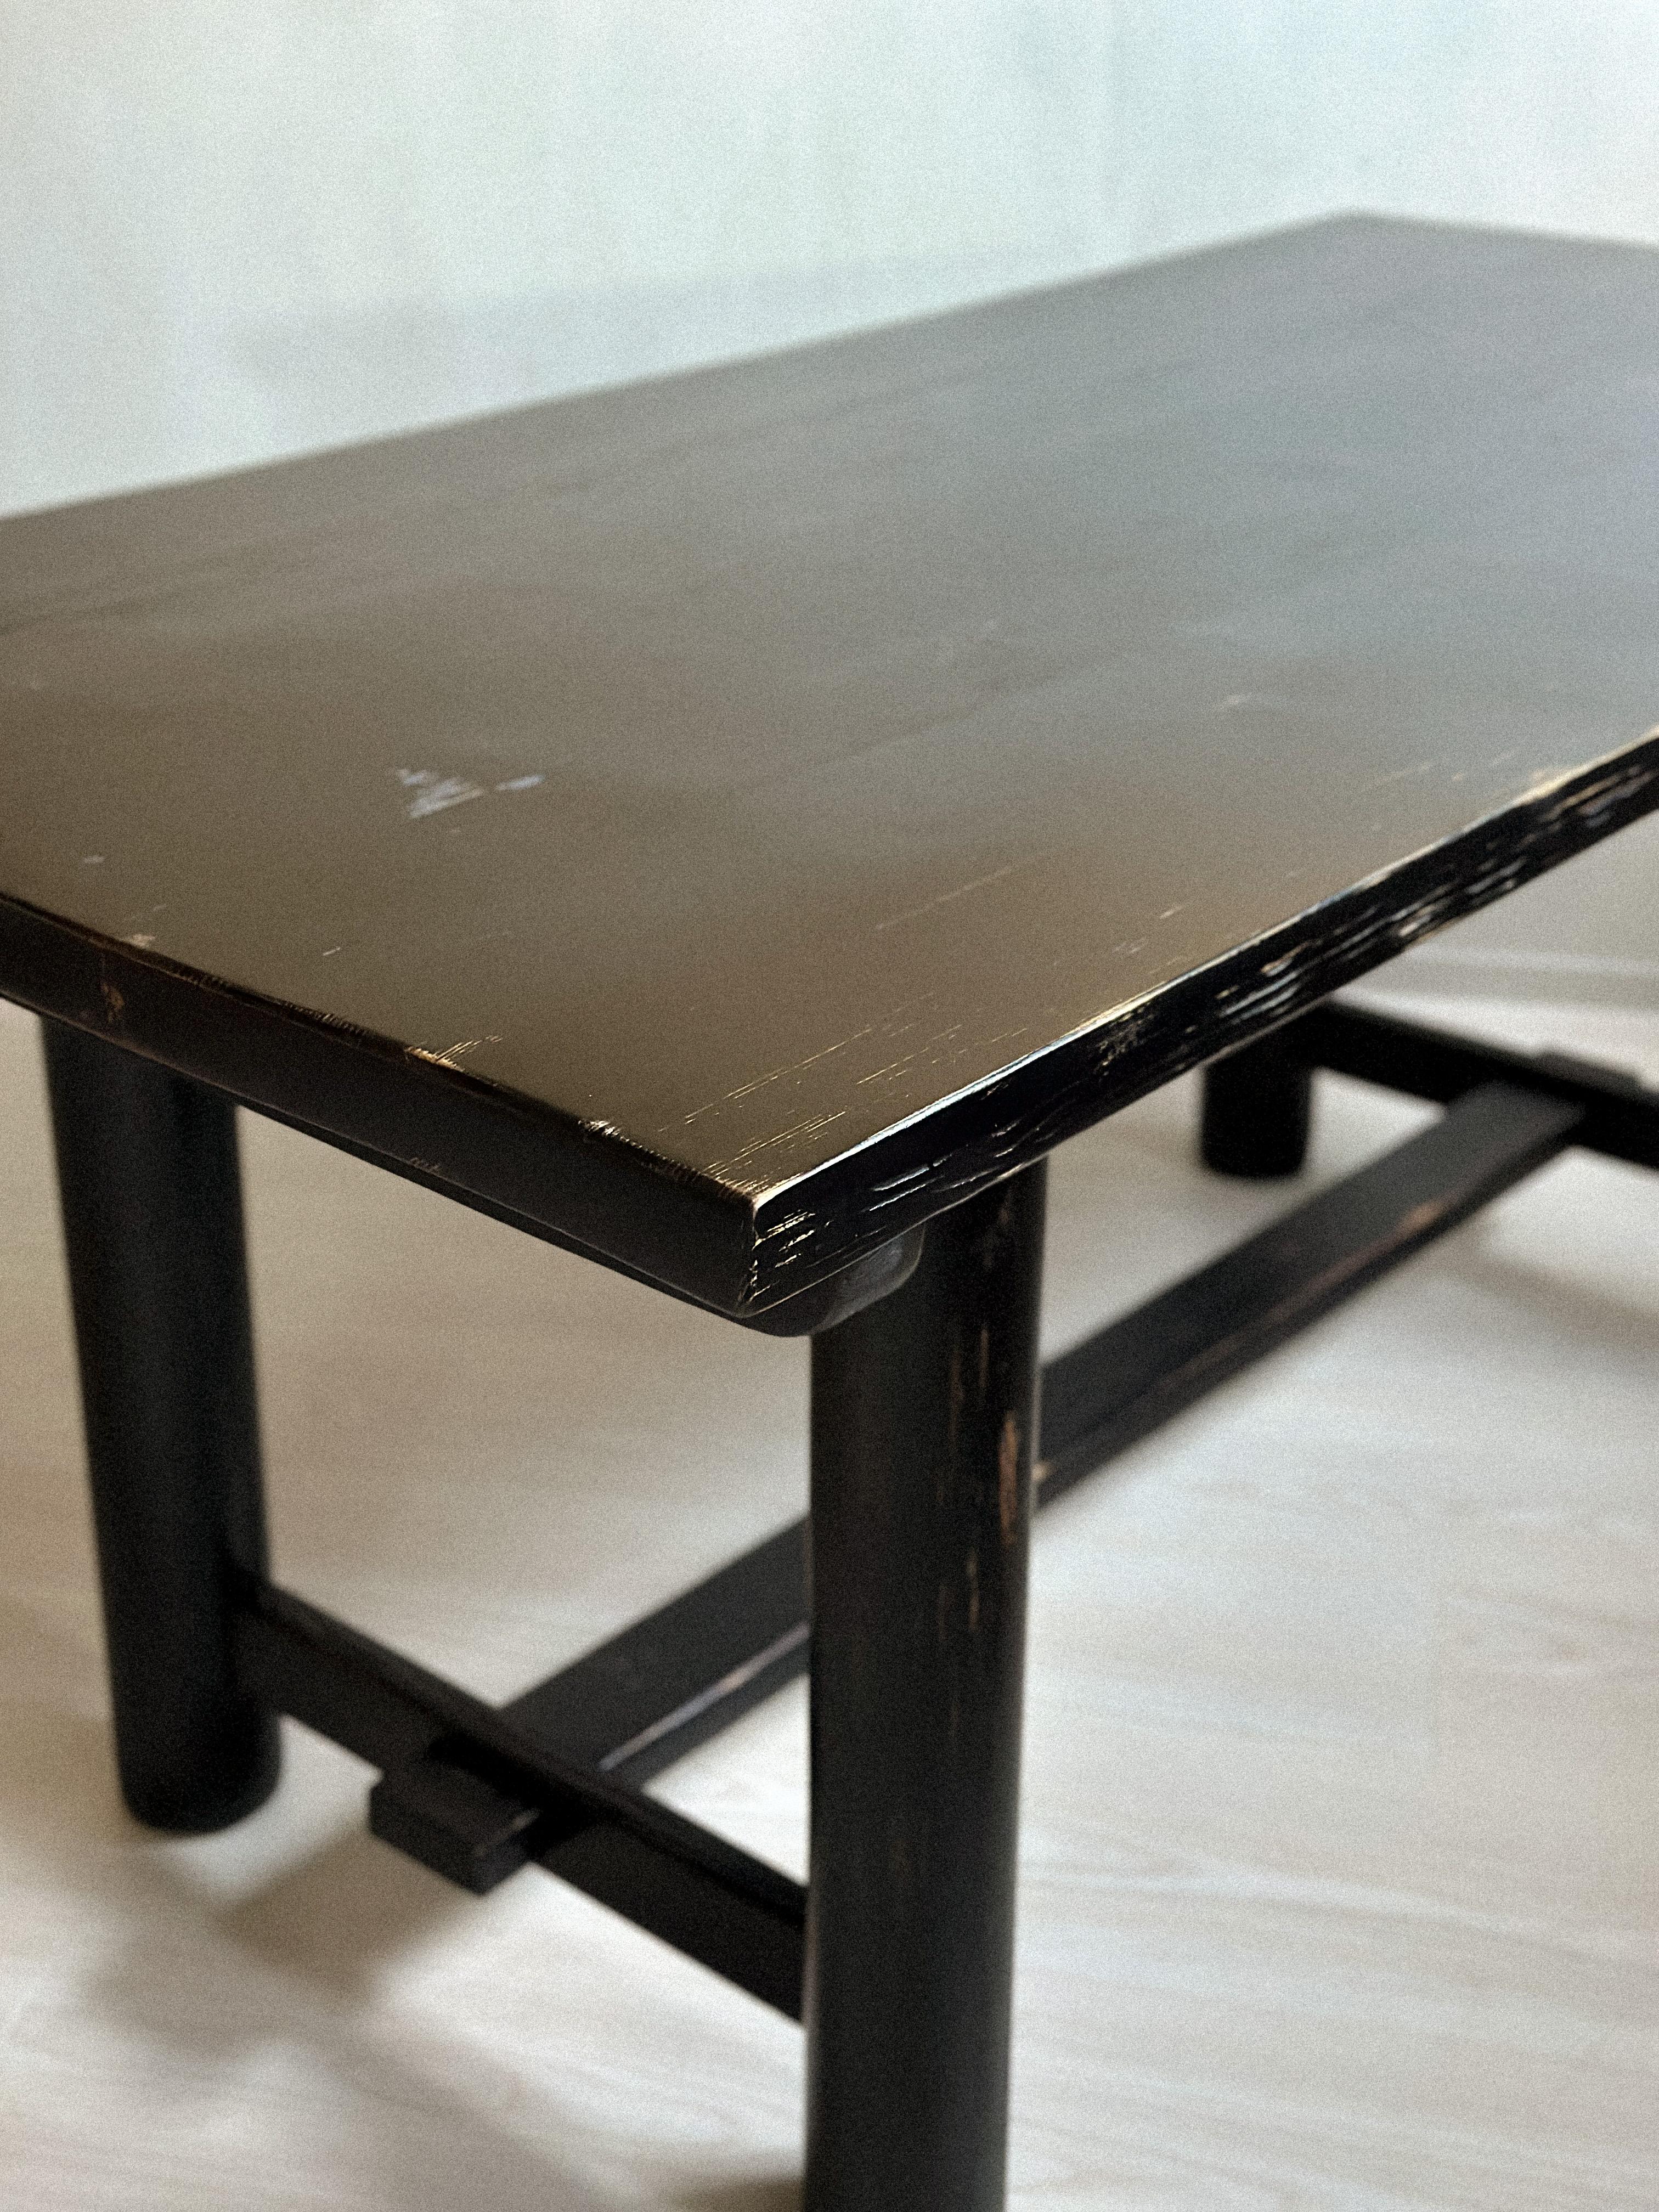 20th Century An Ebonized Meribel Dining Table, Wood, Charlotte Perriand (attr.), France 1959 For Sale